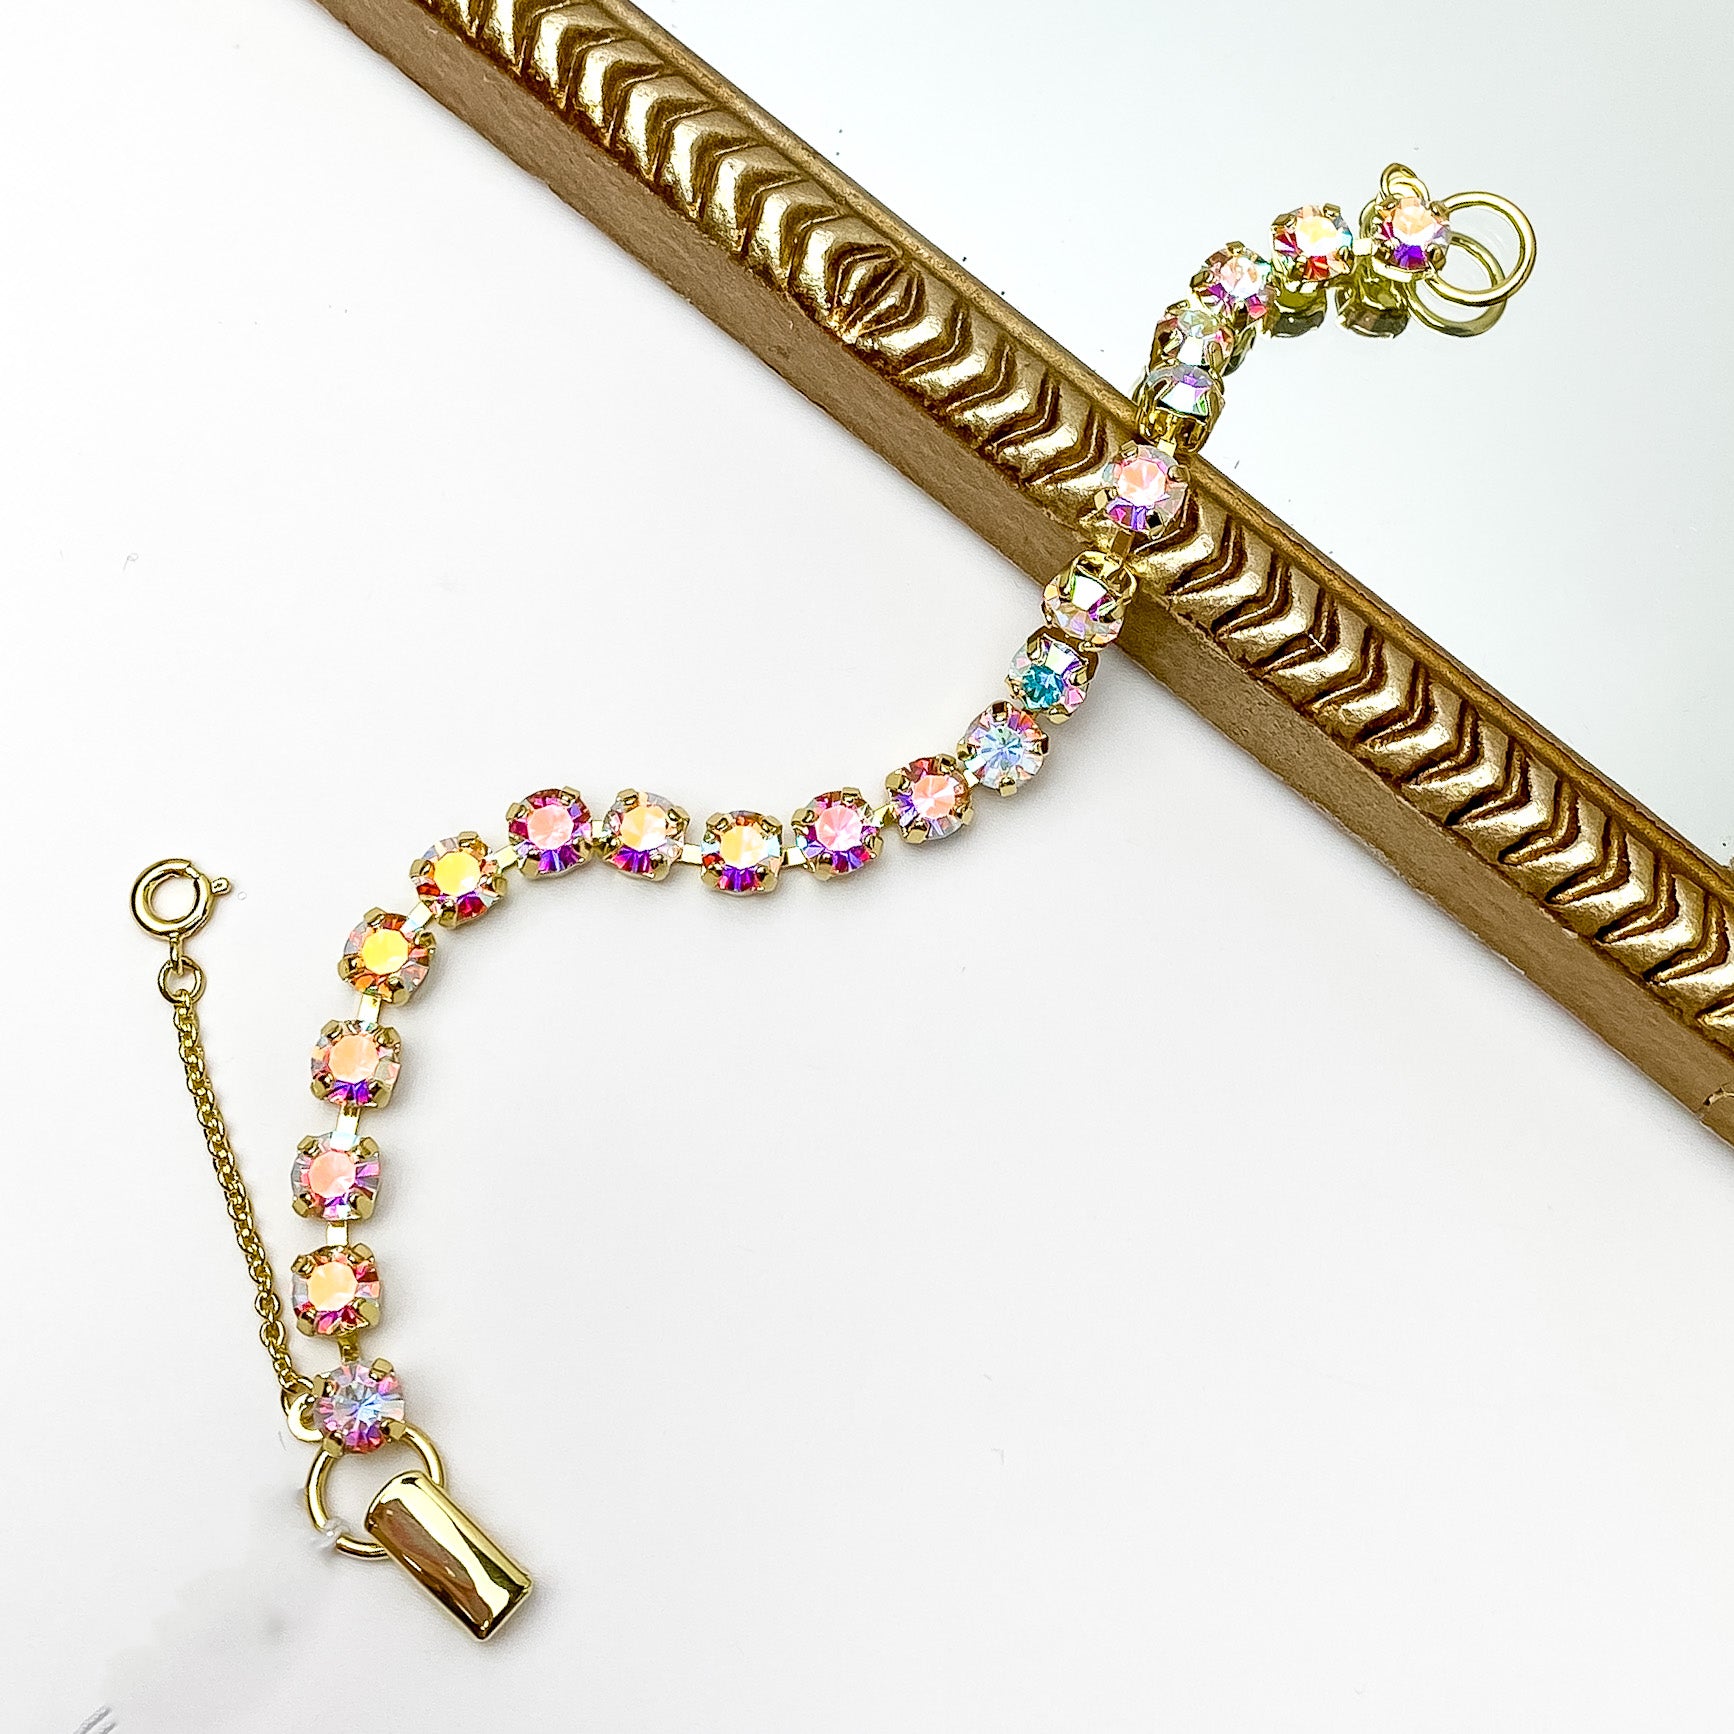 Gold tennis bracelet with Aurora Borealis crystals. Pictured on a white background with a gold frame through the middle. 